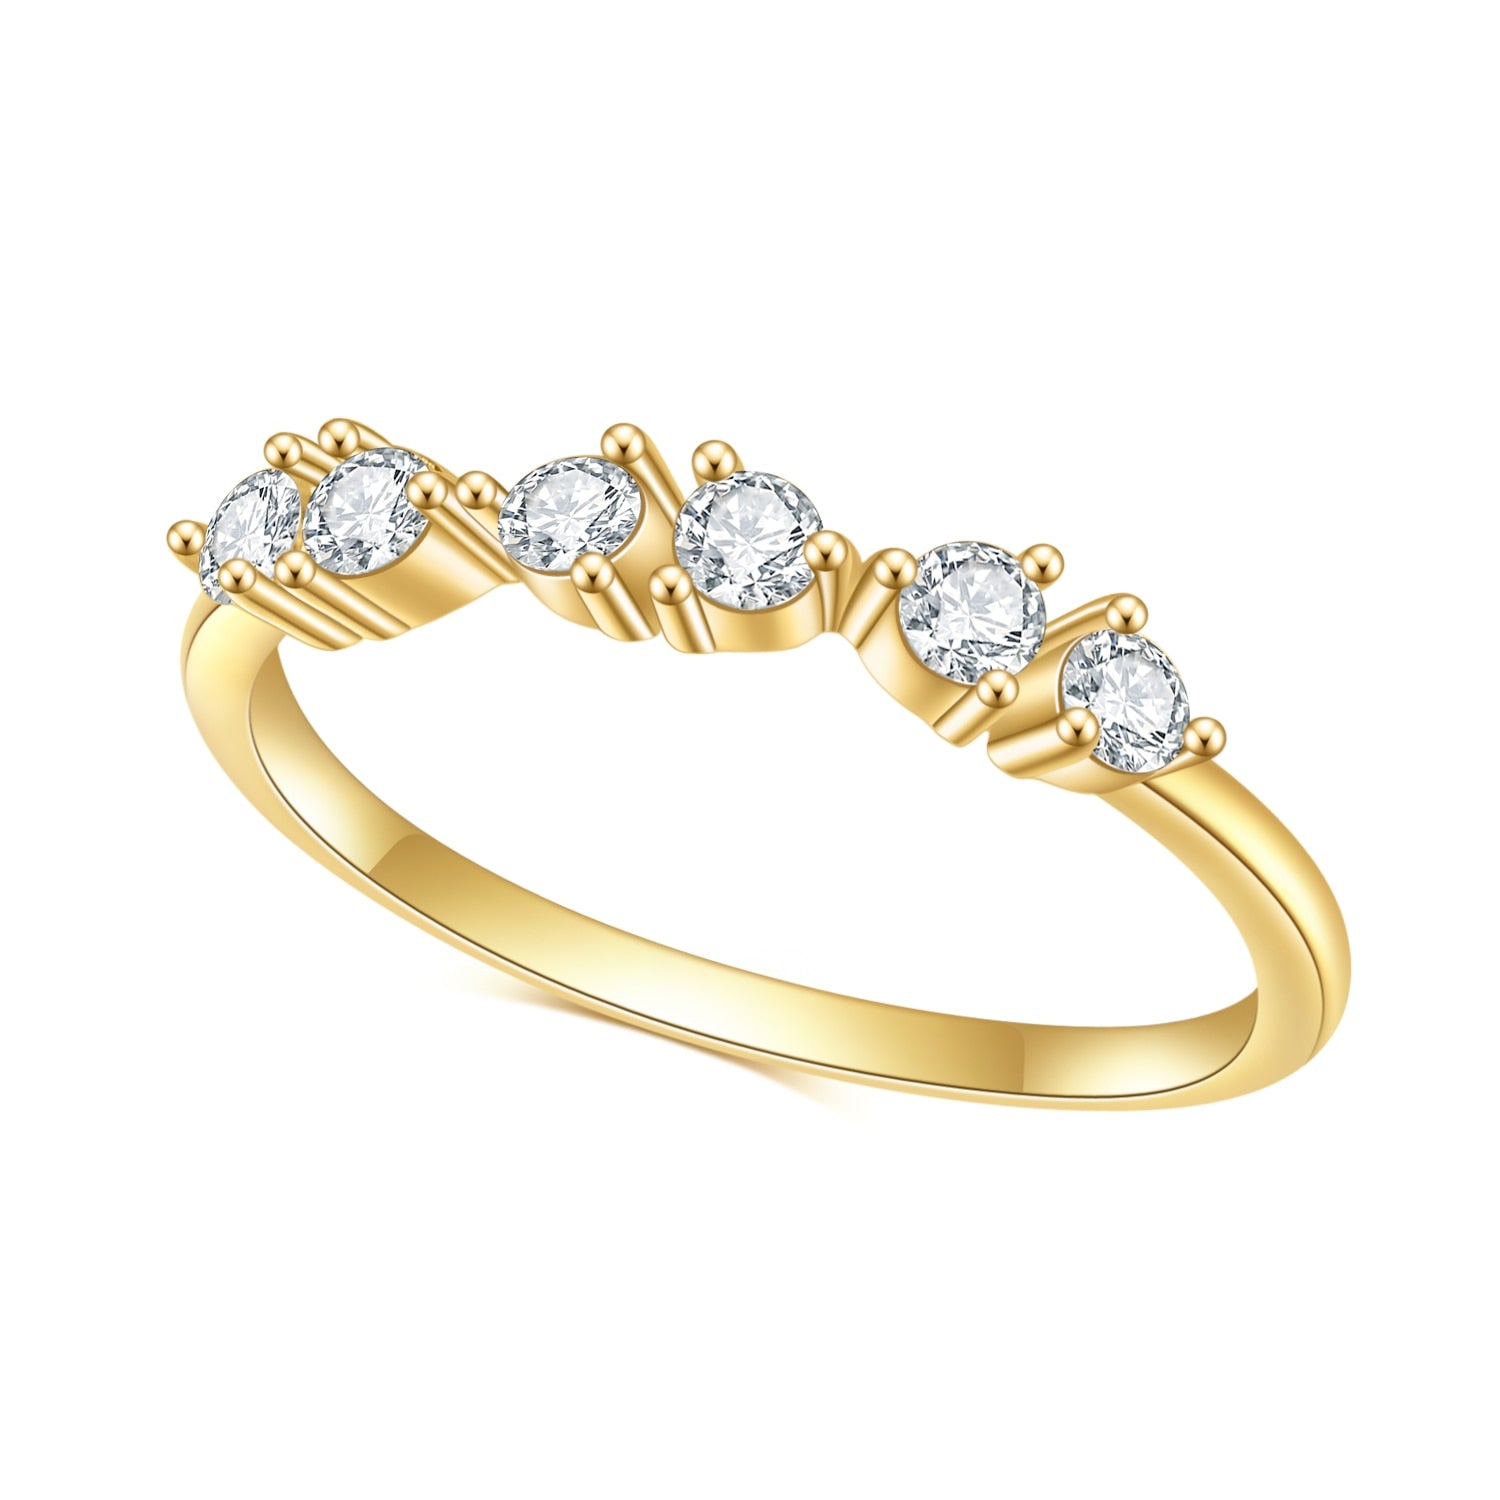 A gold wedding band with 3 pairs of 2 moissanites spaced horizontally on the ring slightly spaced apart.